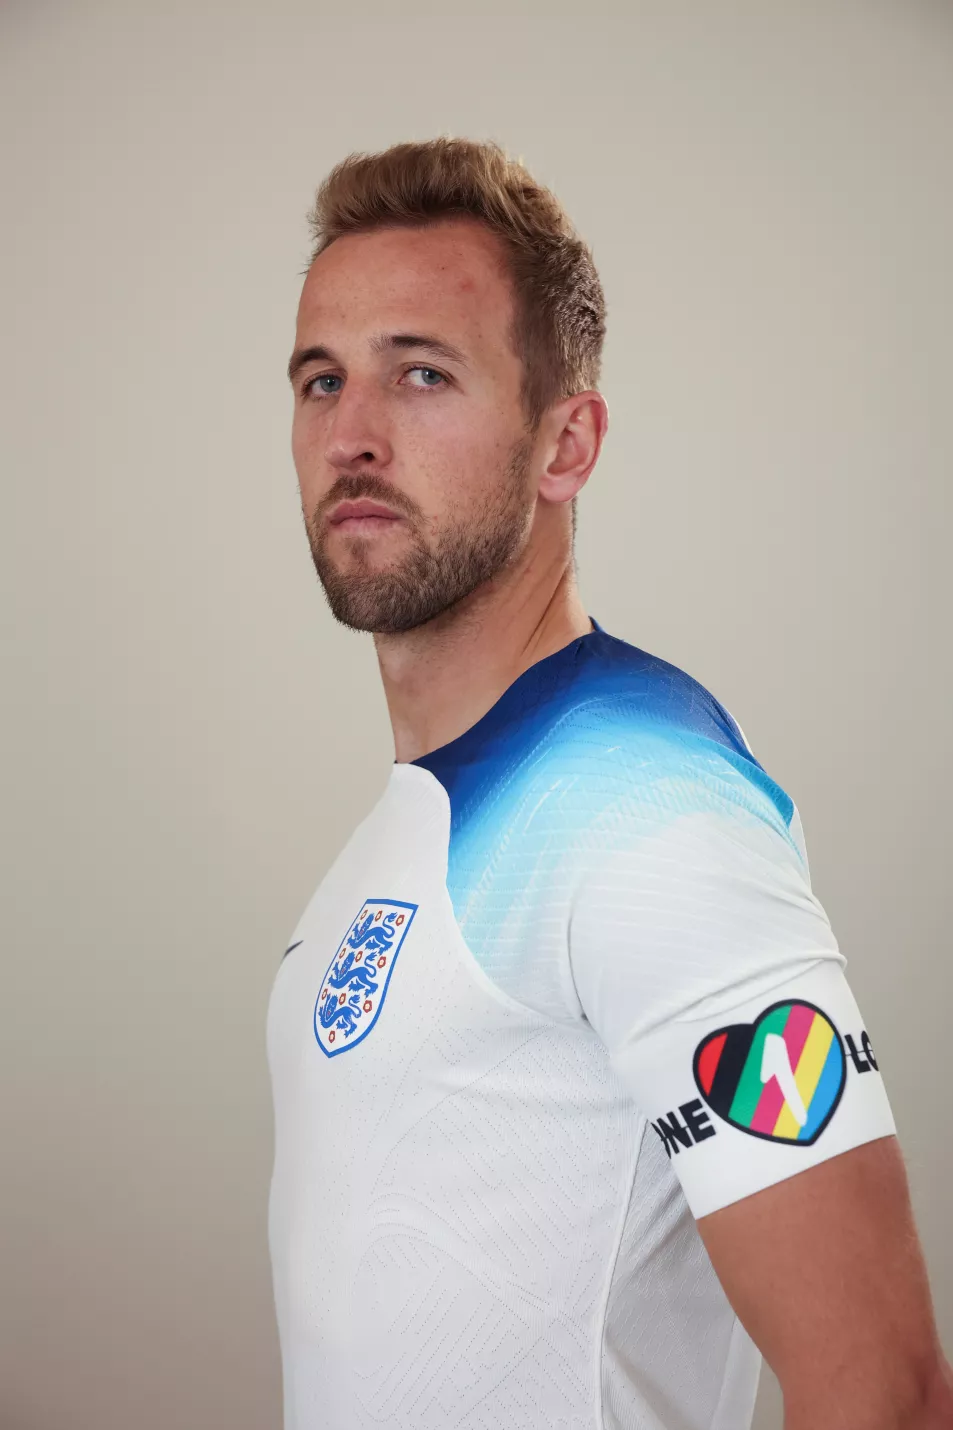 Harry Kane wearing the OneLove armband as part of an anti-discrimination campaign